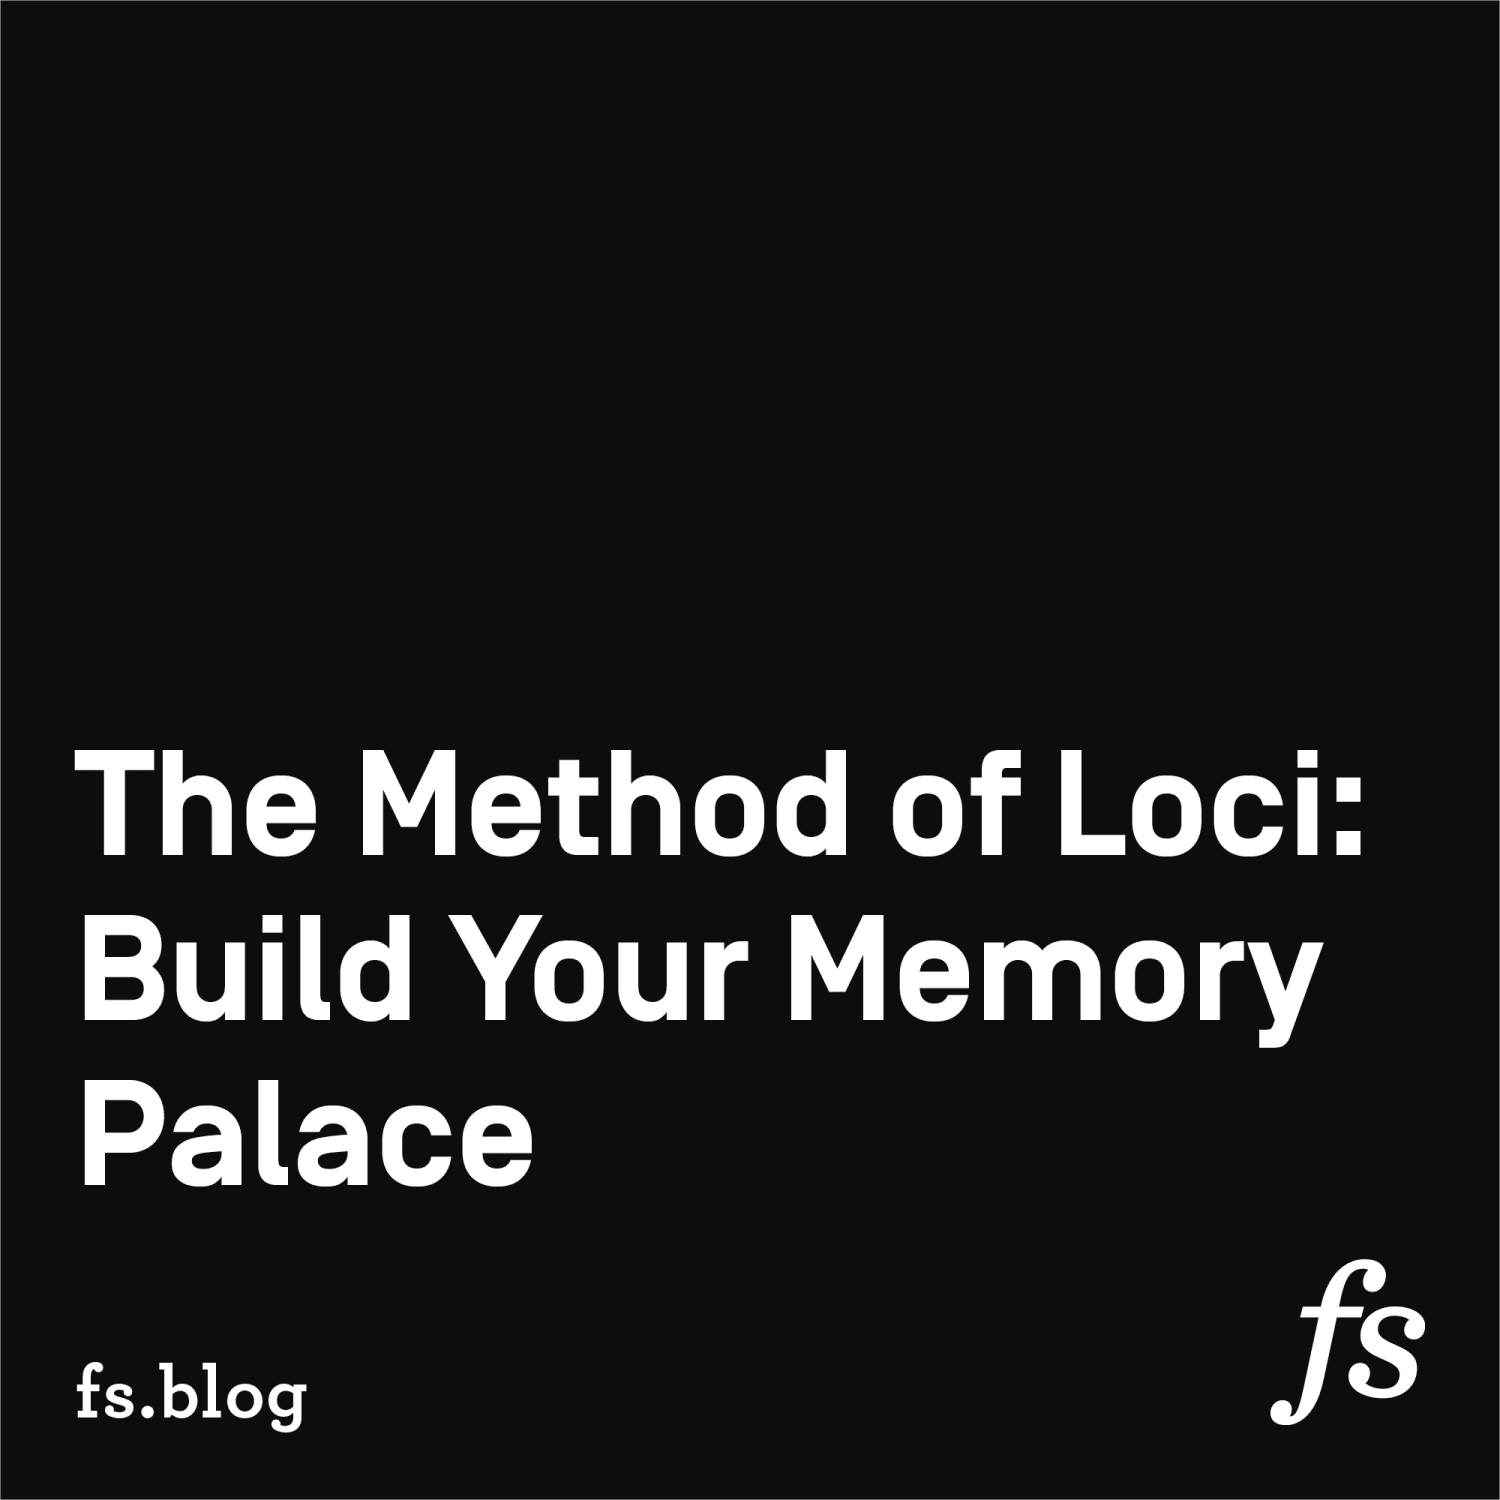 The Method of Loci: Build Your Memory Palace